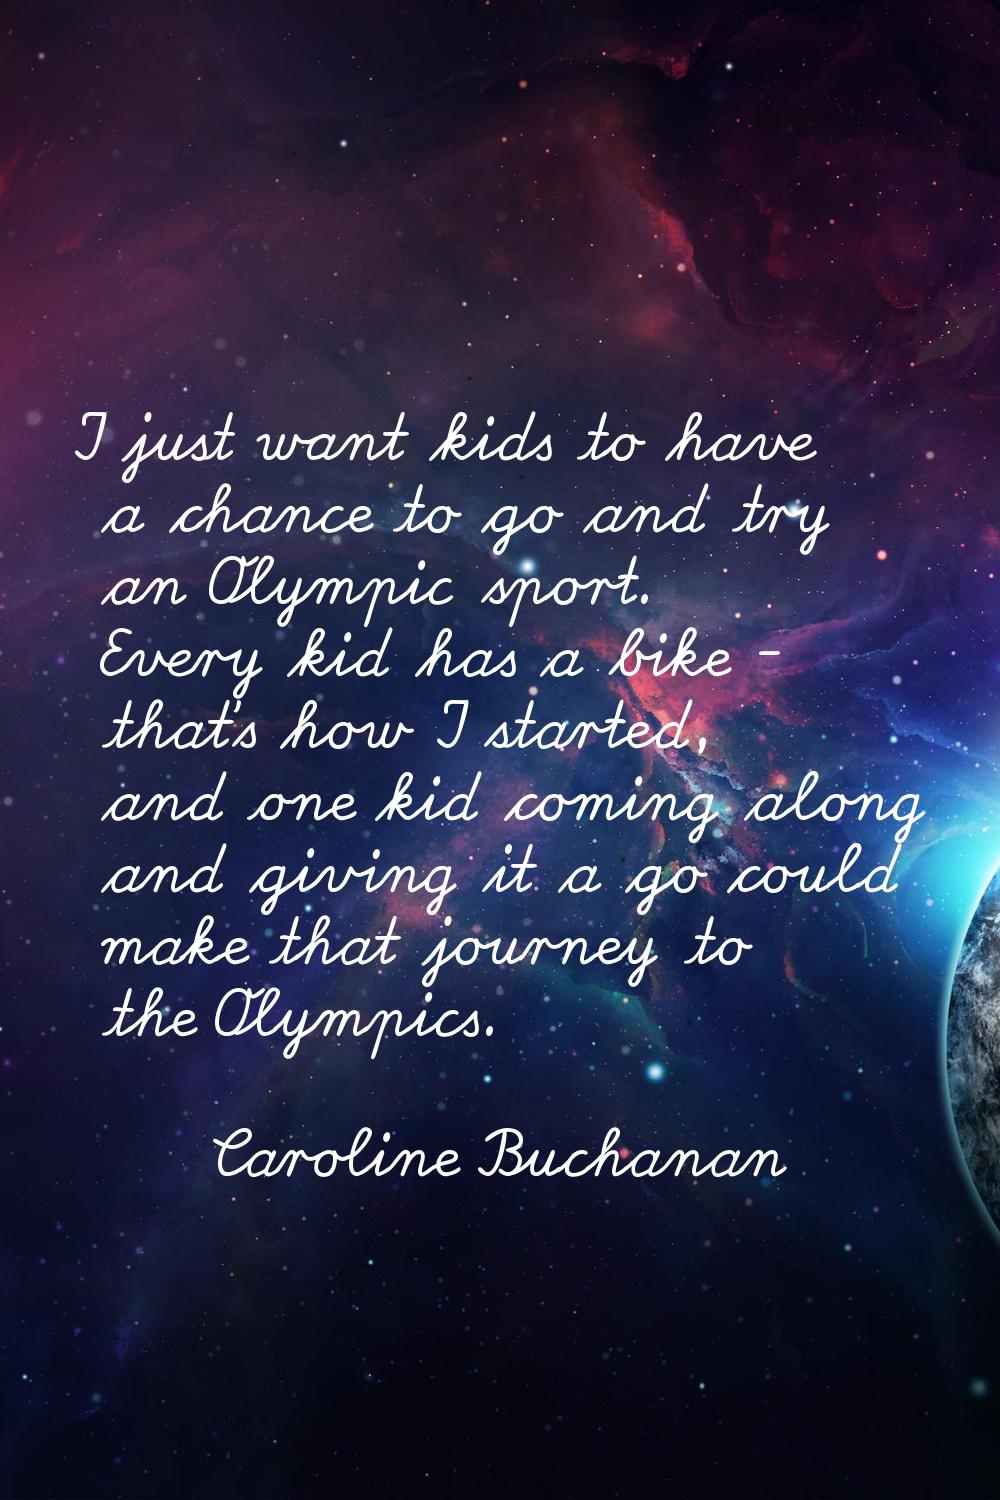 I just want kids to have a chance to go and try an Olympic sport. Every kid has a bike - that's how